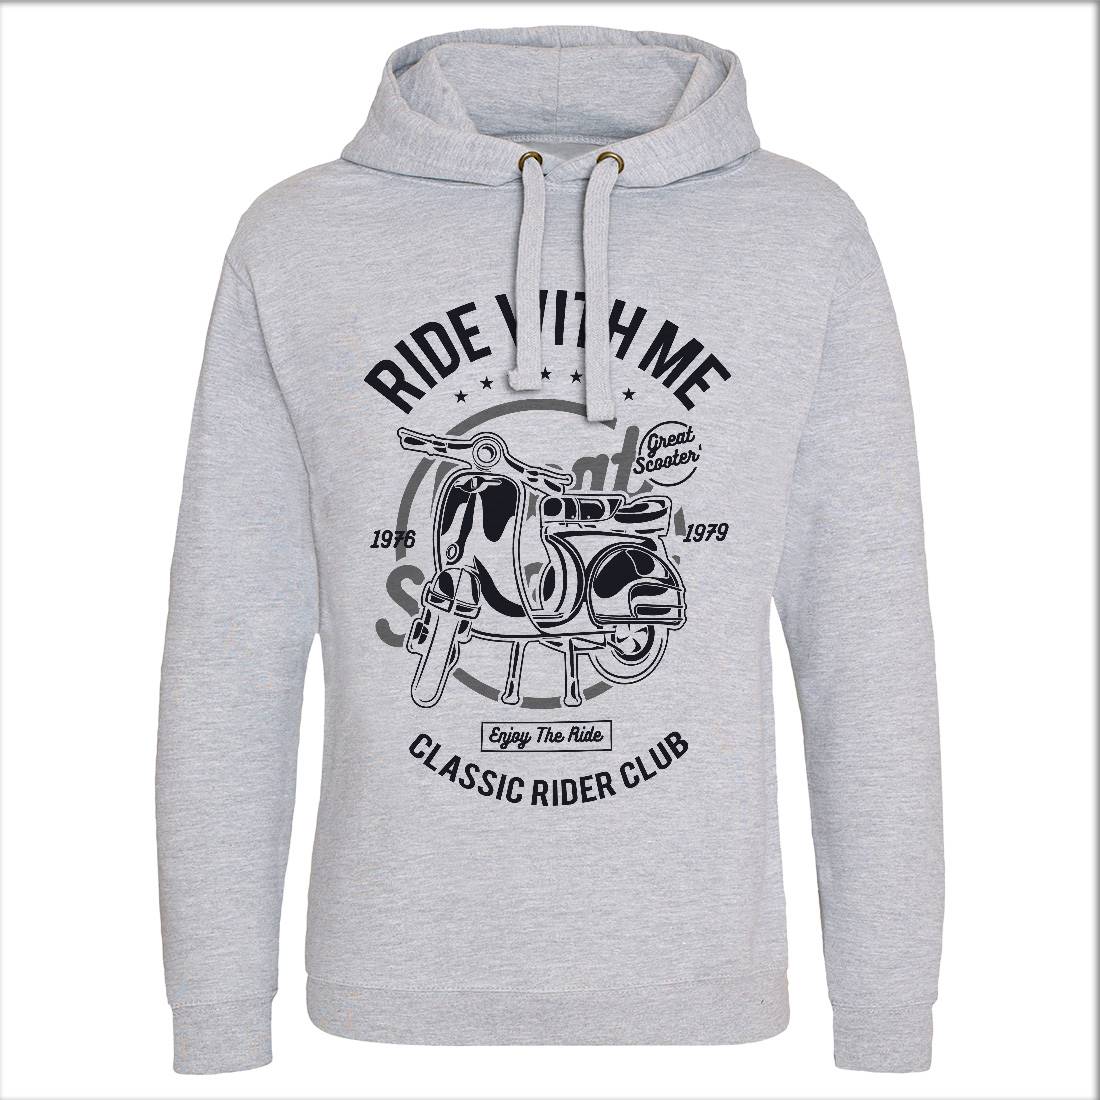 Ride With Me Mens Hoodie Without Pocket Motorcycles A120